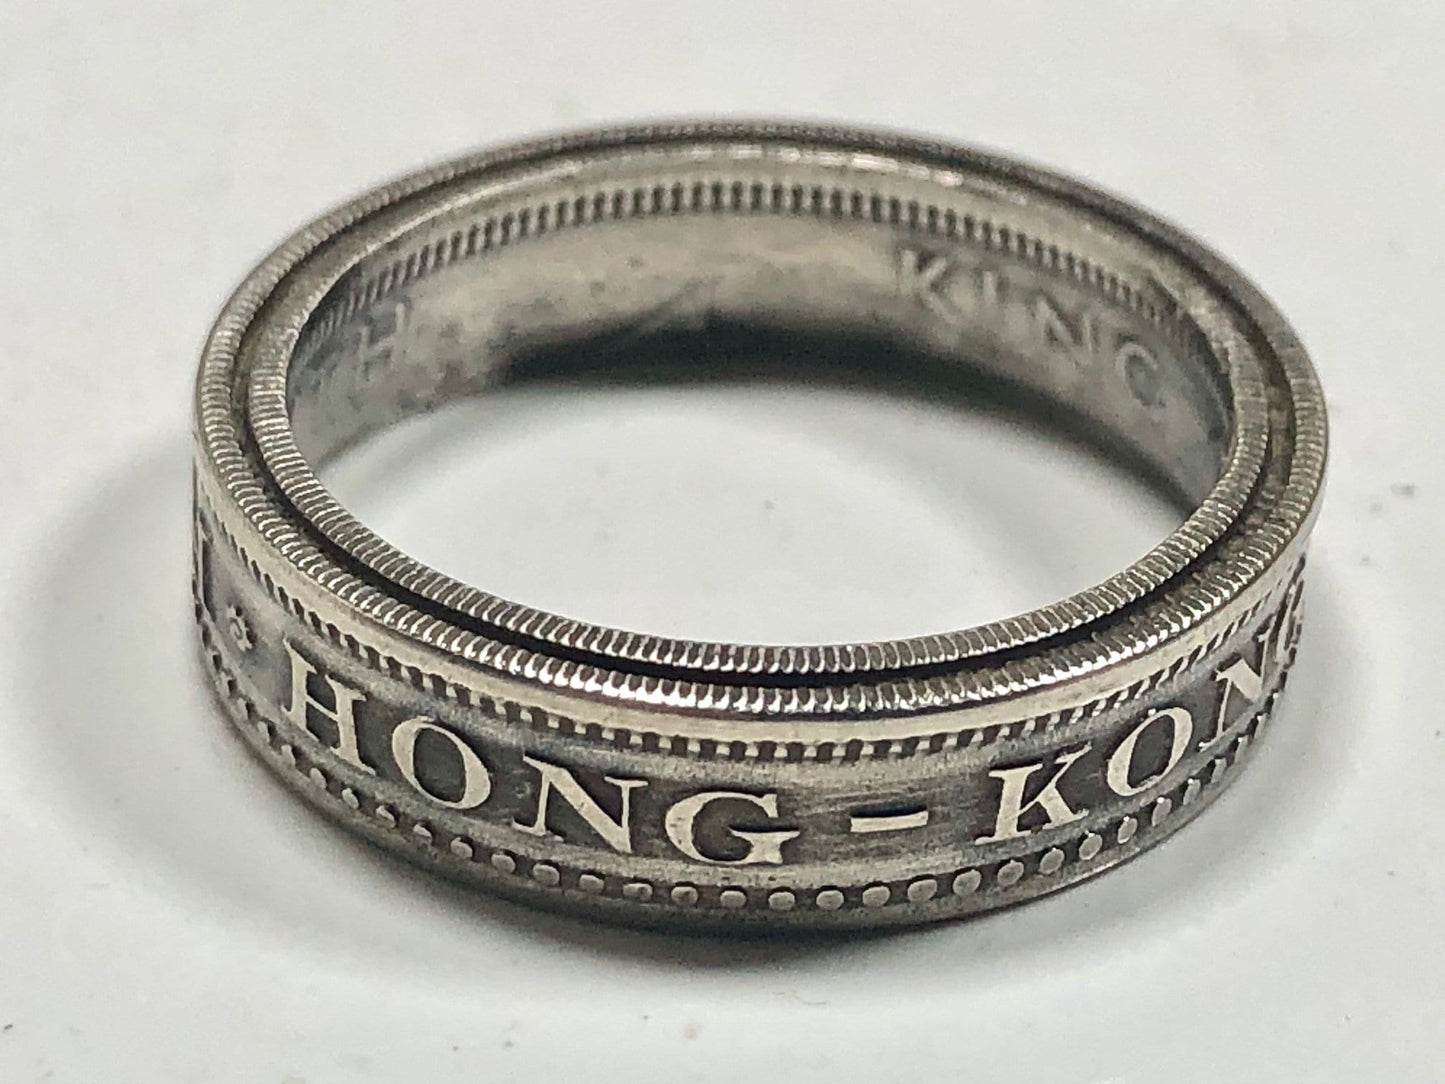 Hong Kong Coin Ring Fifty Cents China Handmade Personal Custom Ring Gift For Friend Coin Ring Gift For Him Her World Coin Collector